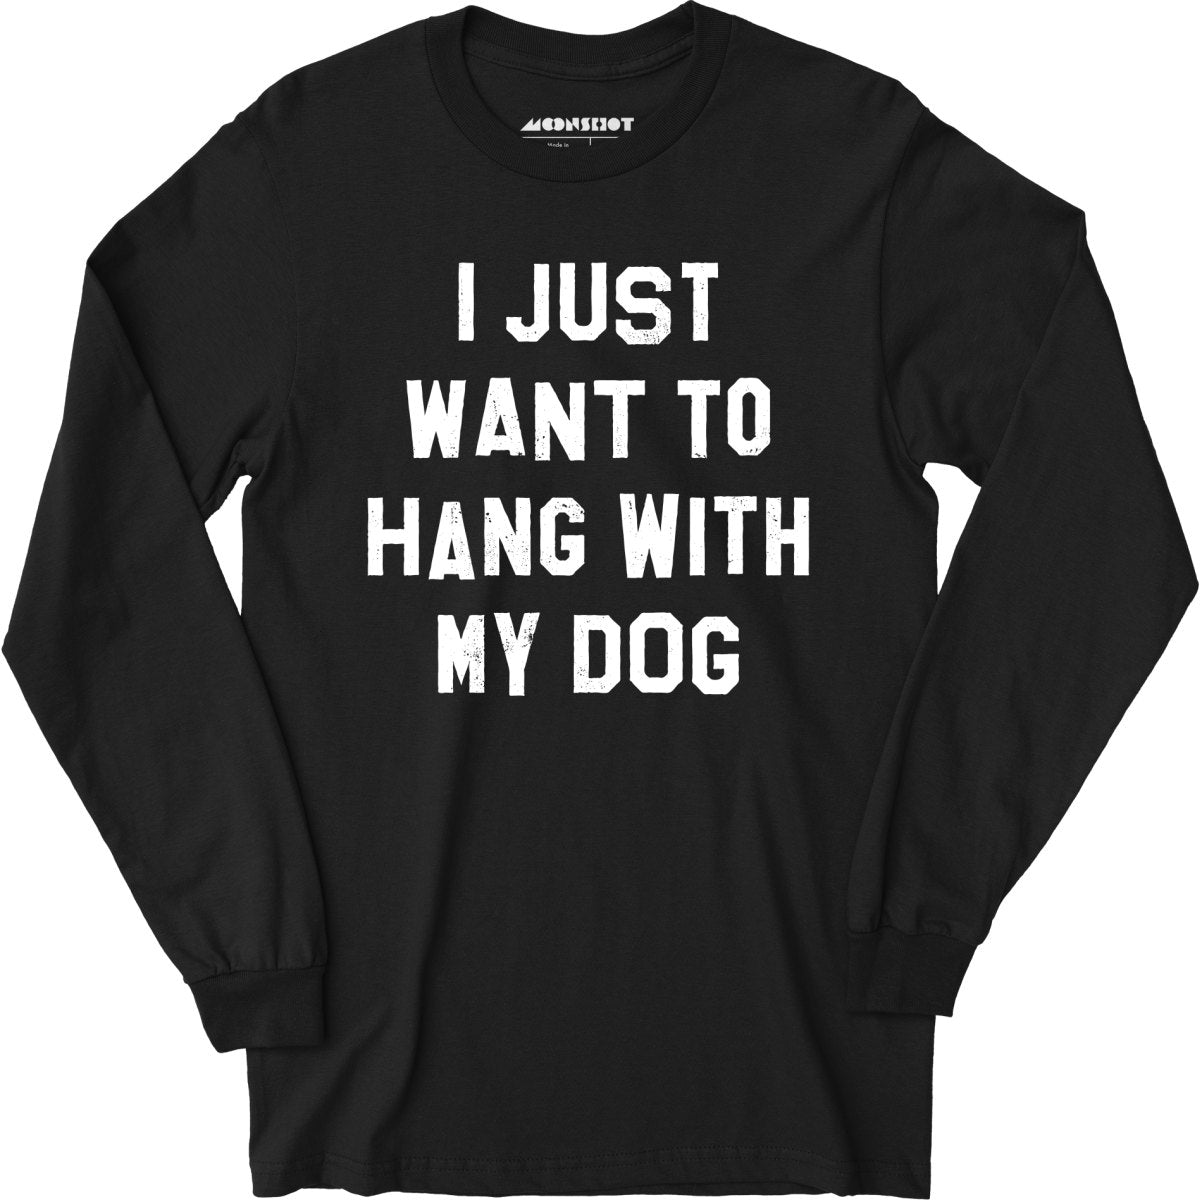 I Just Want to Hang With My Dog - Long Sleeve T-Shirt